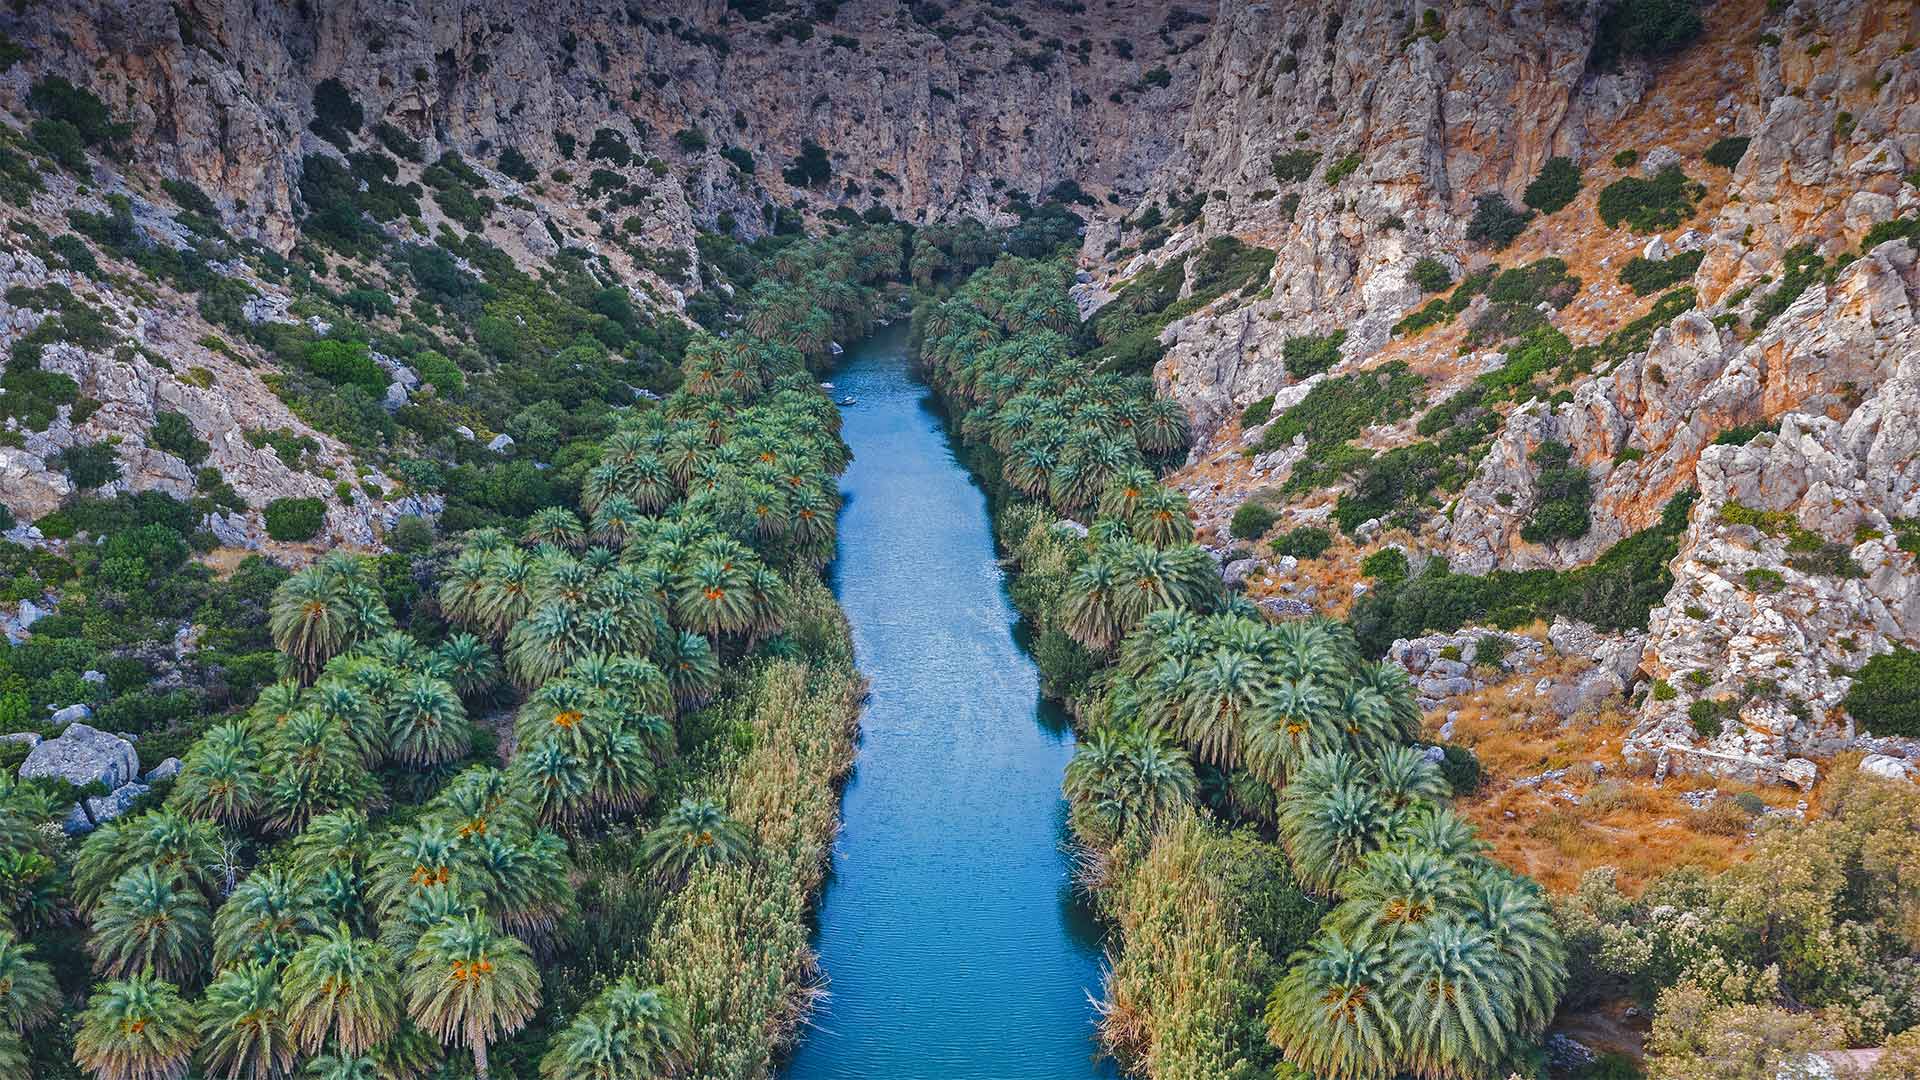 Preveli Gorge with river and palm tree forest, Crete, Greece - borchee/Getty Images)